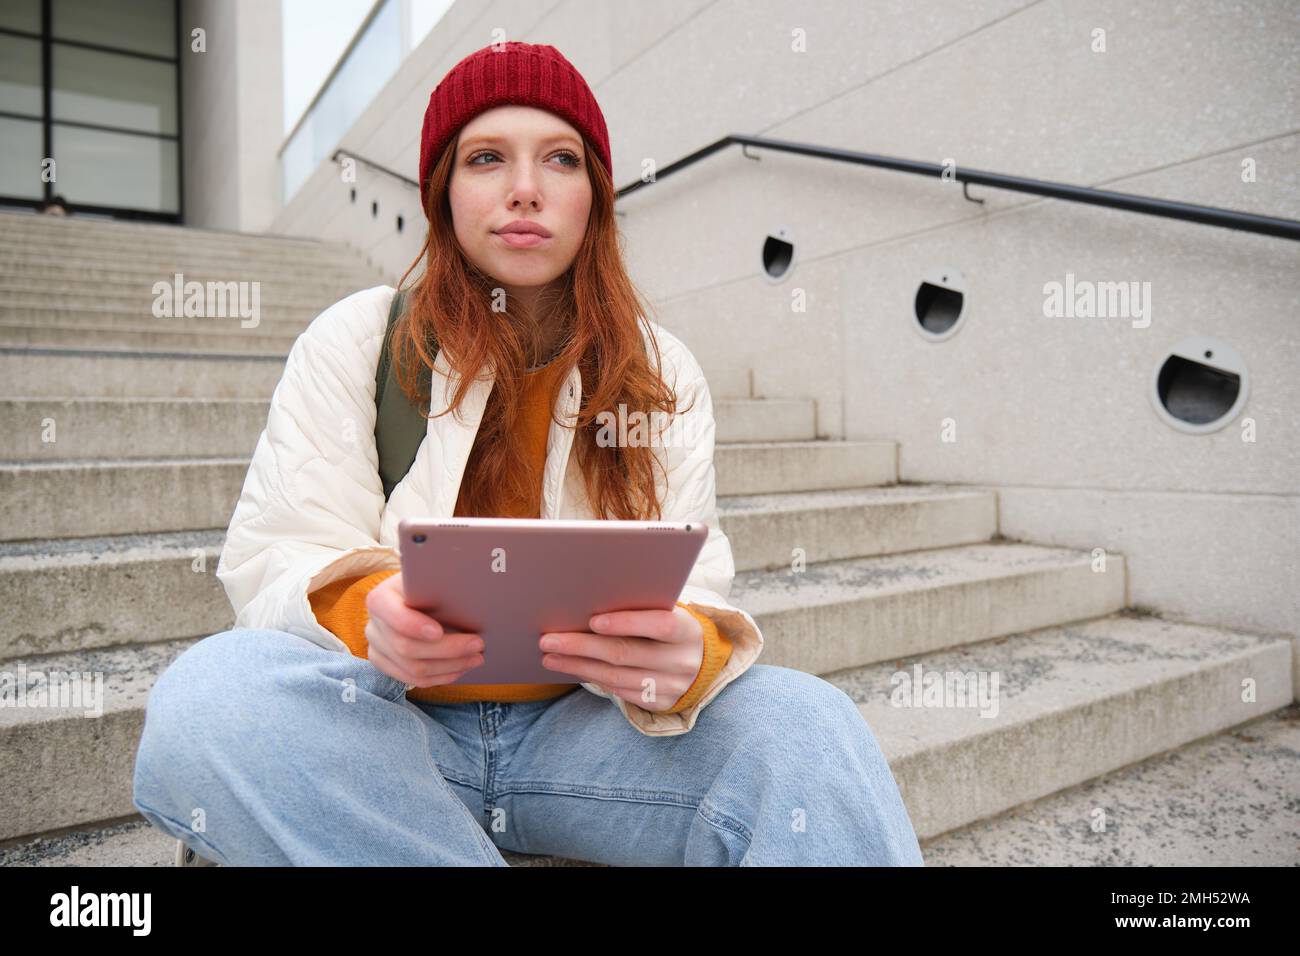 Young stylish girl, redhead female students sits on stairs outdoors with digital tablet, reads, uses social media app on gadget, plays games while Stock Photo